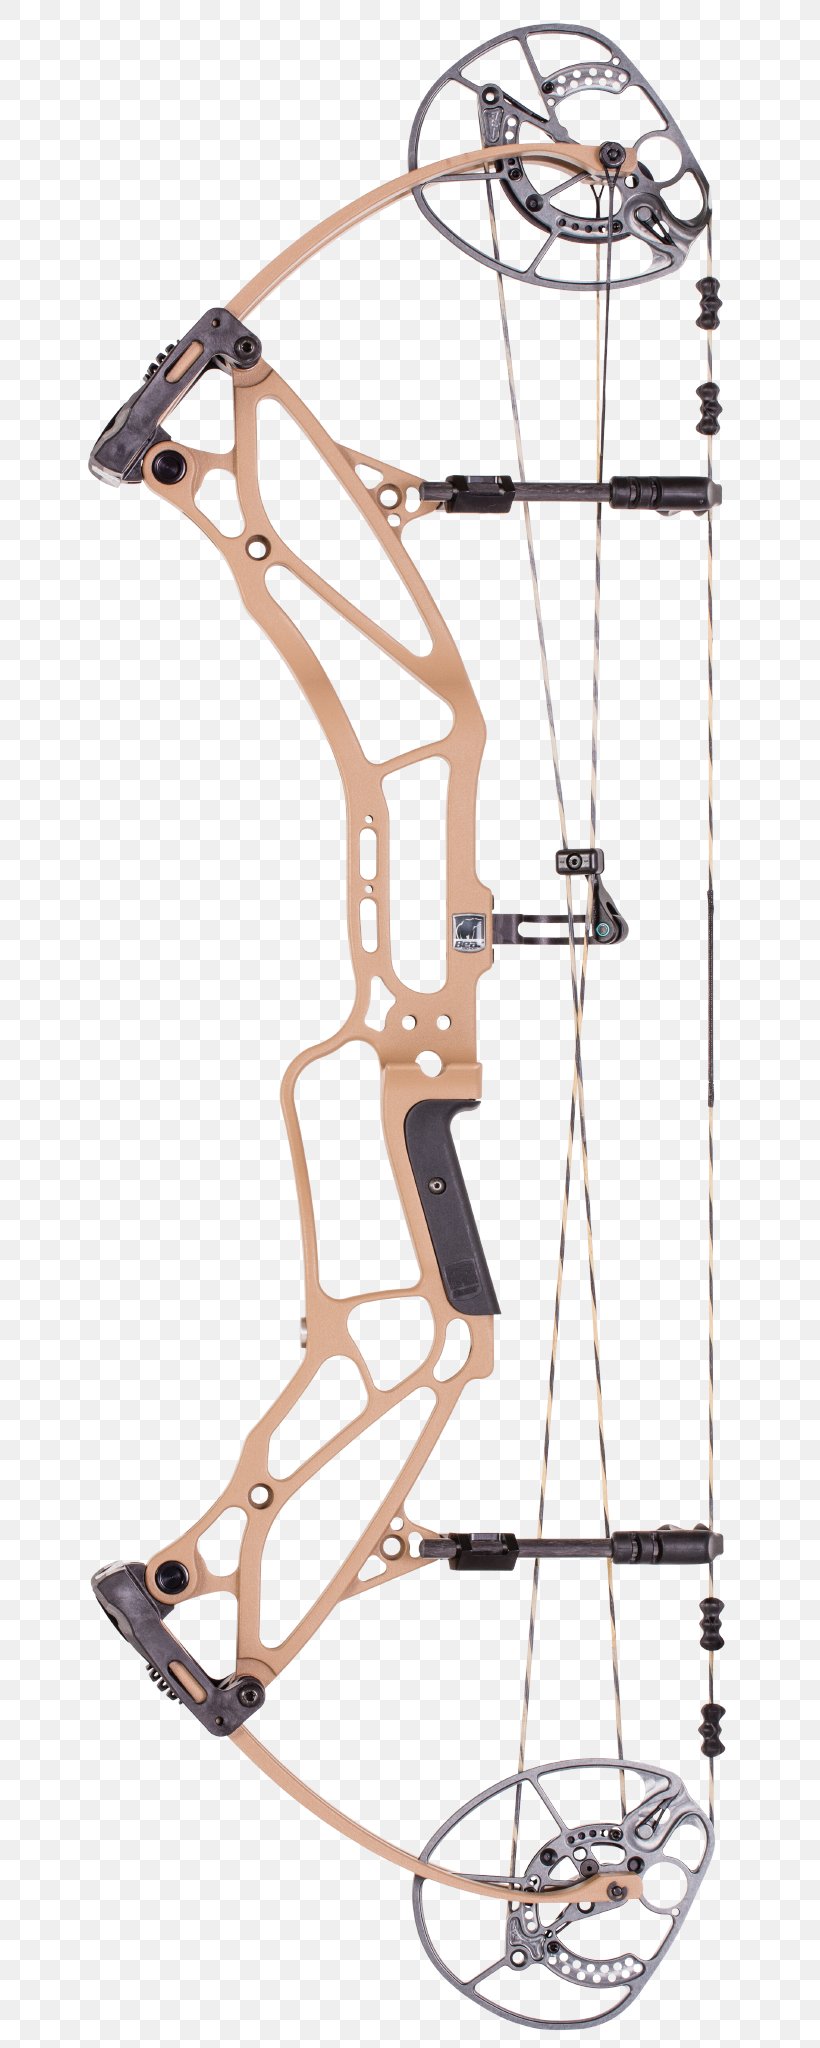 Bear Archery Compound Bows Bow And Arrow Bowhunting, PNG, 694x2048px, Bear Archery, Archery, Bear, Bow And Arrow, Bowhunting Download Free